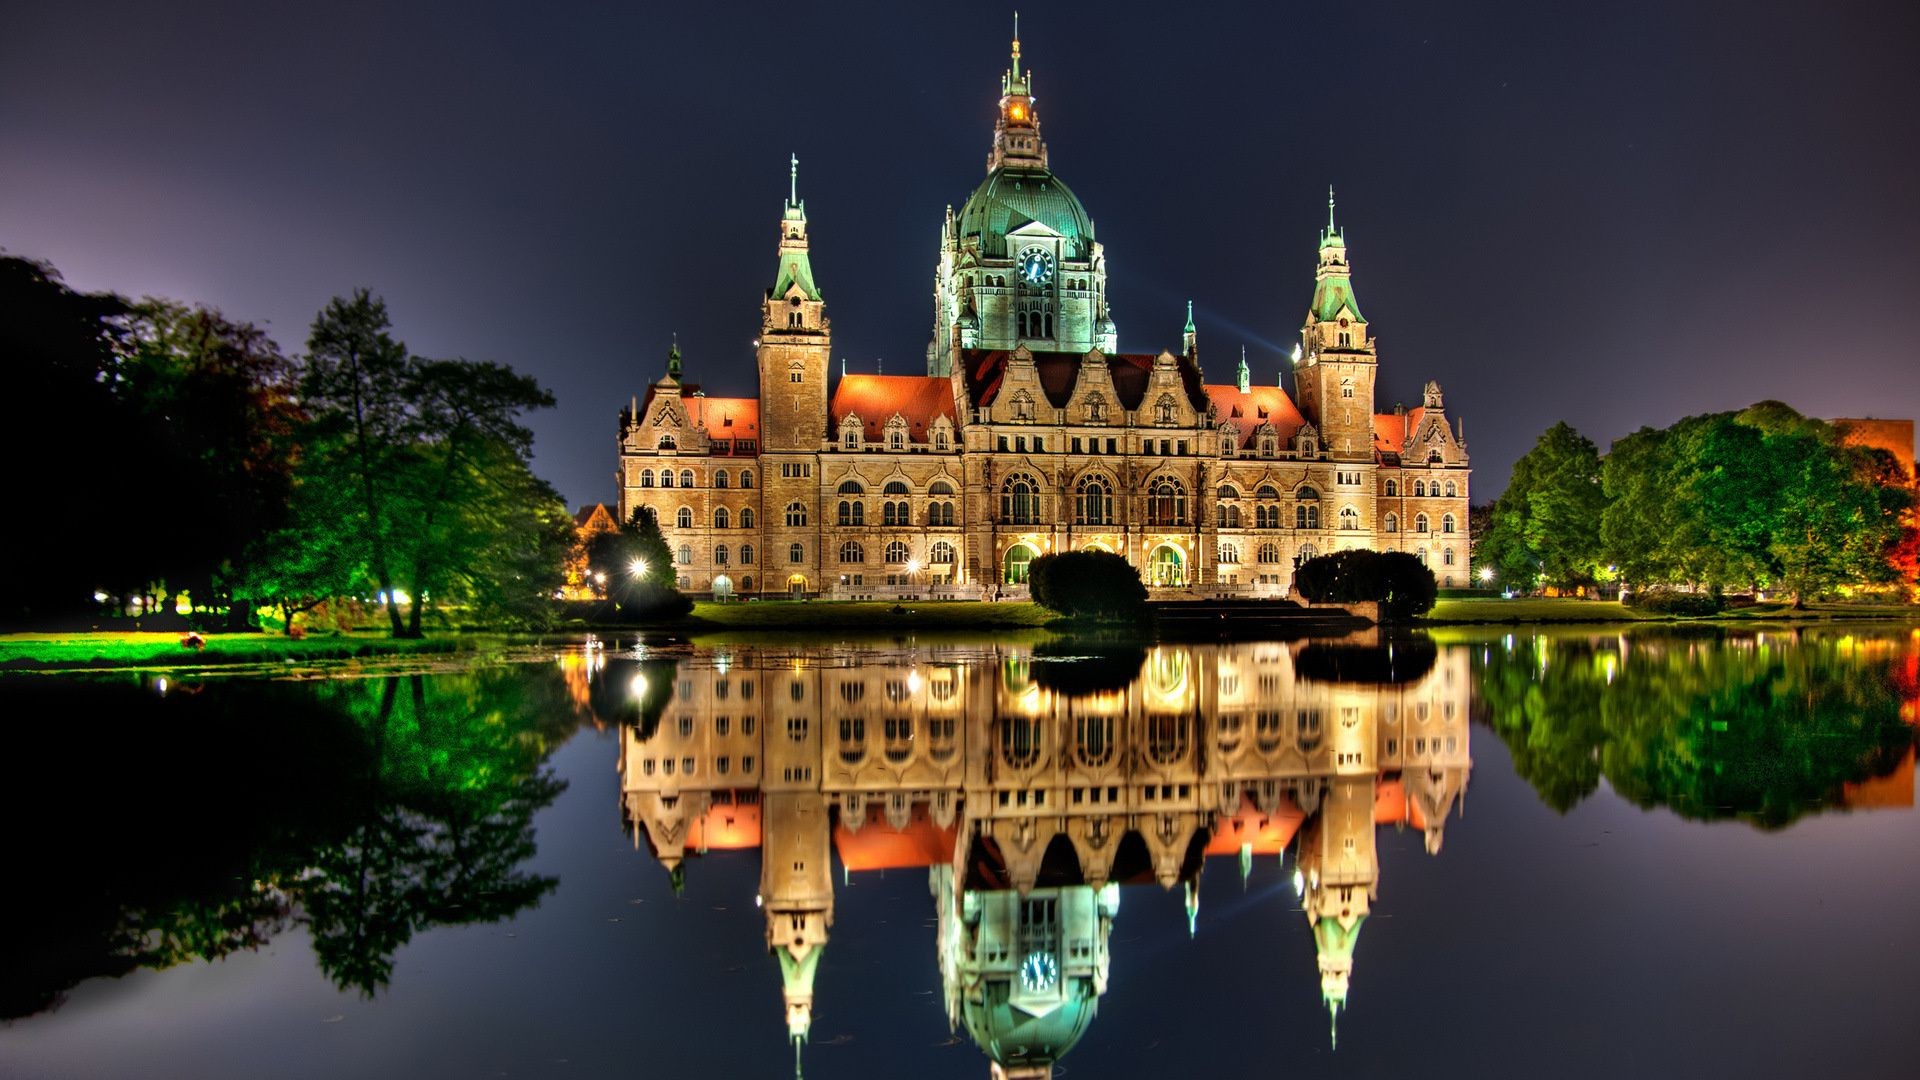 locks architecture travel city sky building illuminated castle outdoors dusk evening tourism tower old town reflection river landmark place ancient